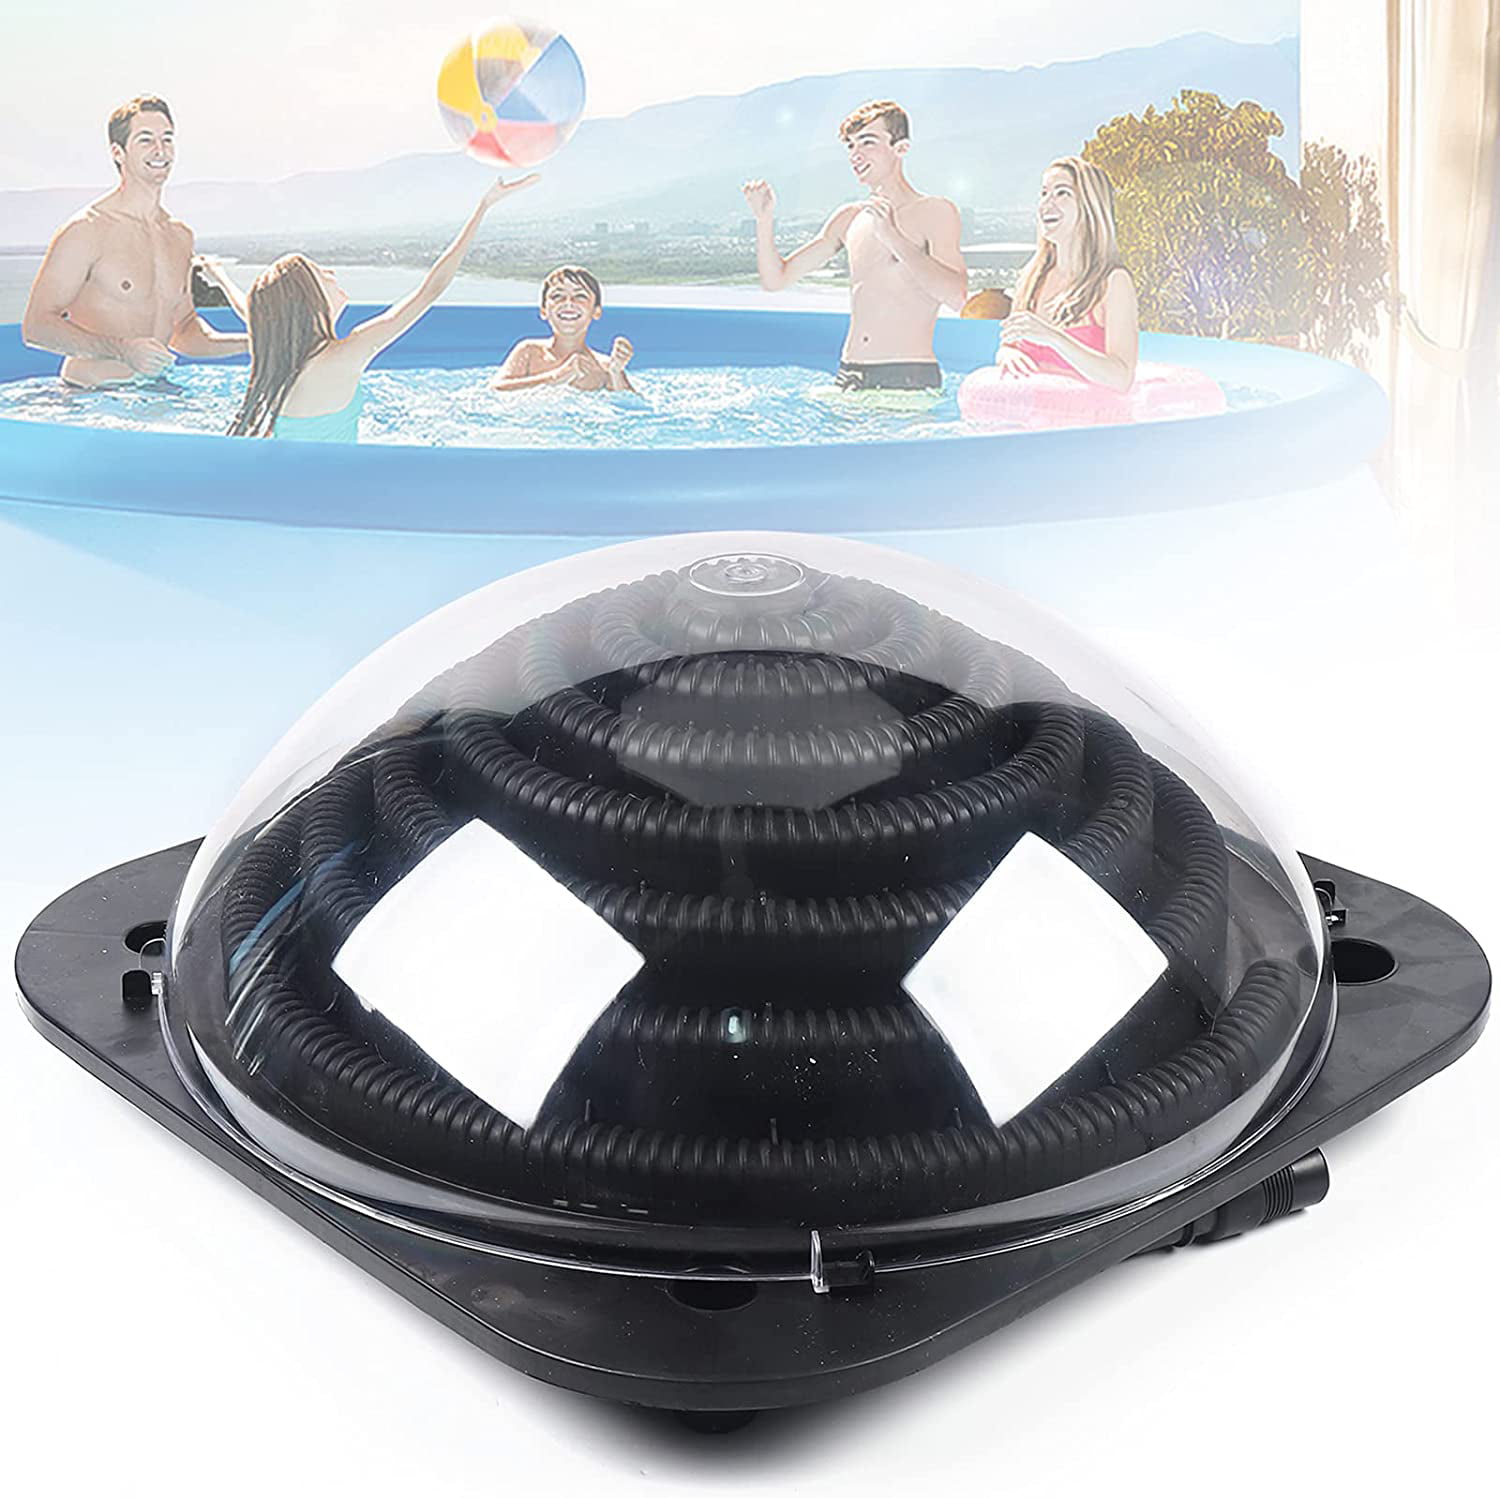 Black Outdoor Solar Dome Inground &Above Ground Swimming Pool Water Heater New 